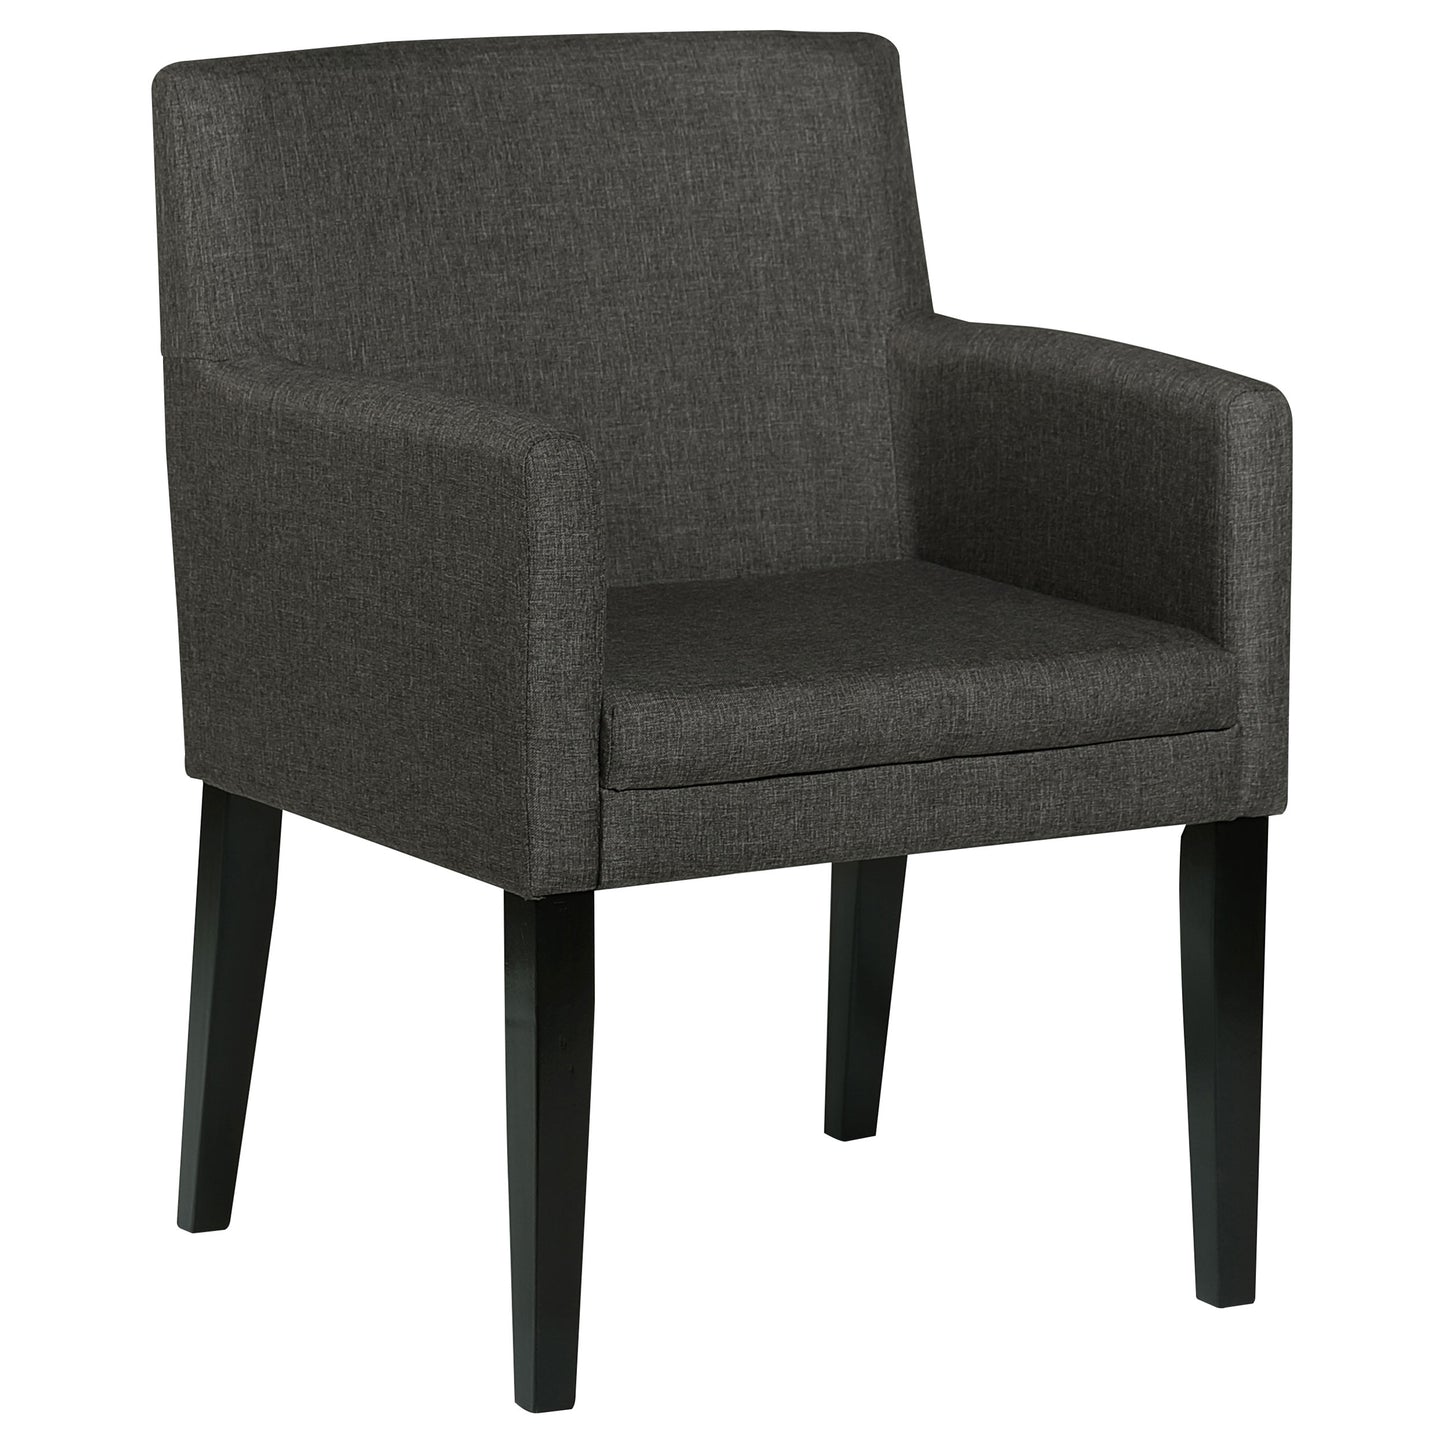 Catherine Upholstered Dining Arm Chair Charcoal Grey and Black (Set of 2)